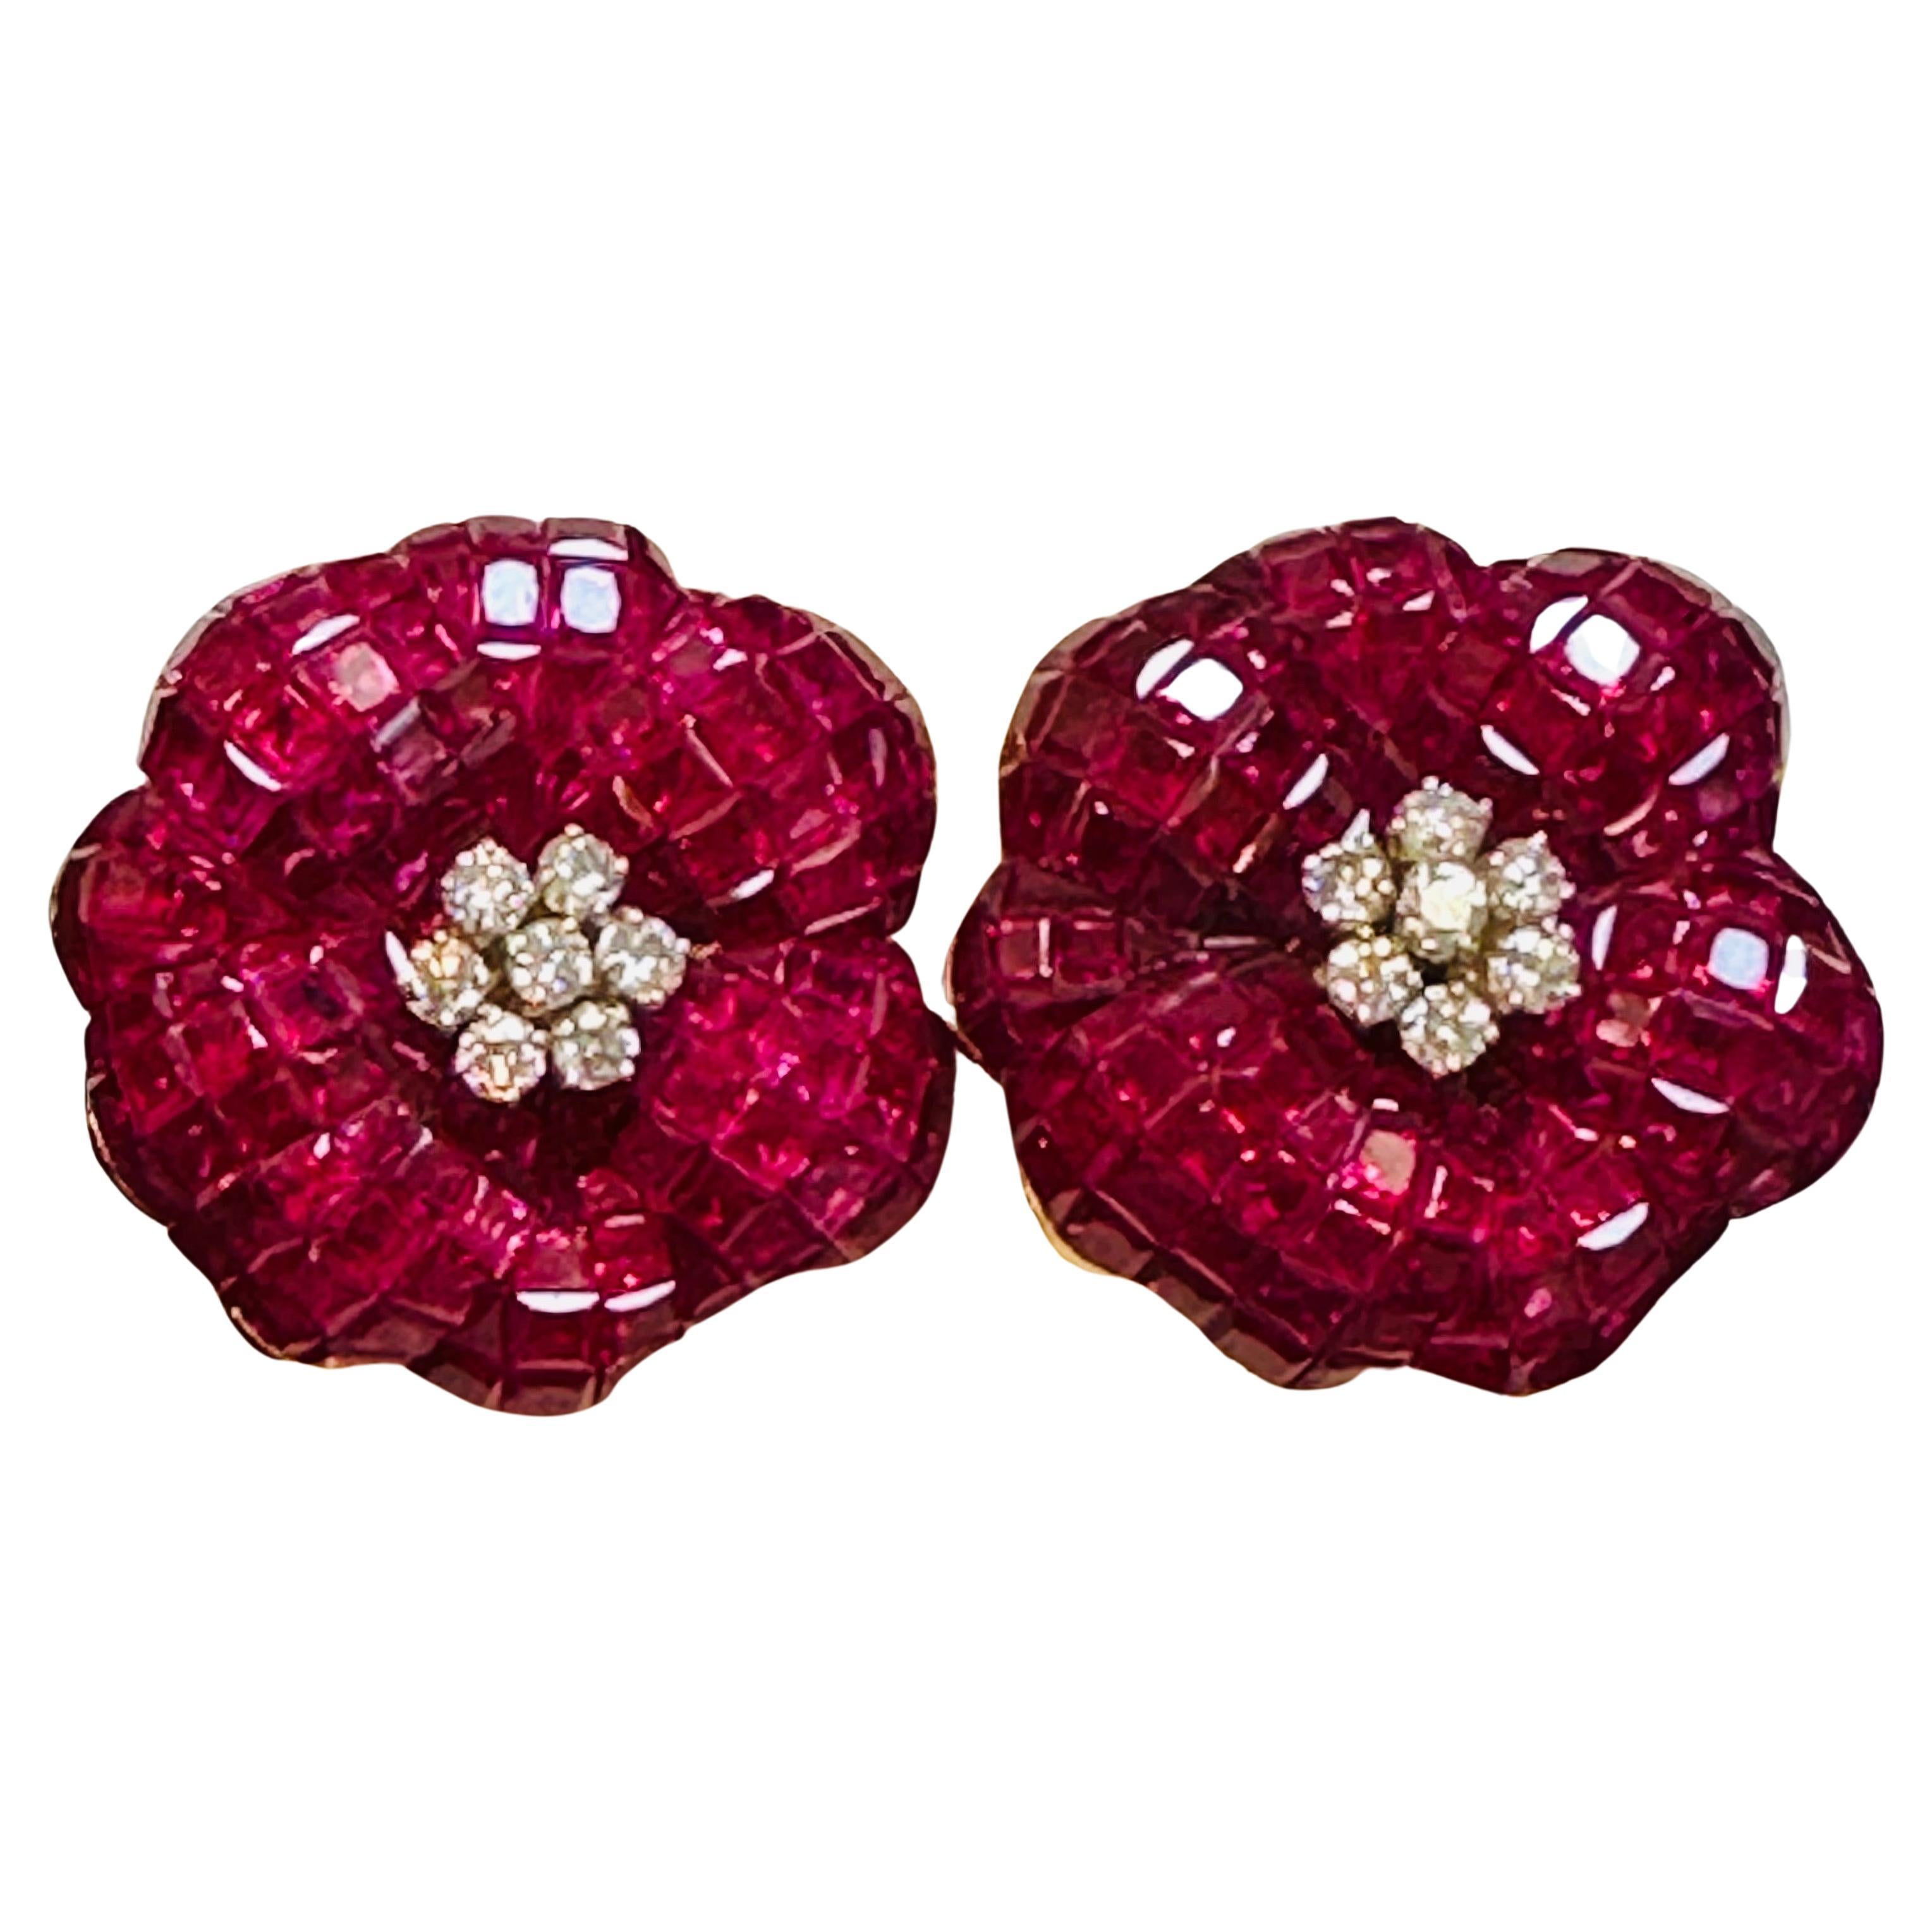 These stunning cocktail earrings feature an invisible or mystery set of princess cut Burma ruby and diamond flowers. set in 18 karat yellow gold. The princess-cut rubies are set in a beautiful flower frame, creating an intricate and elegant design